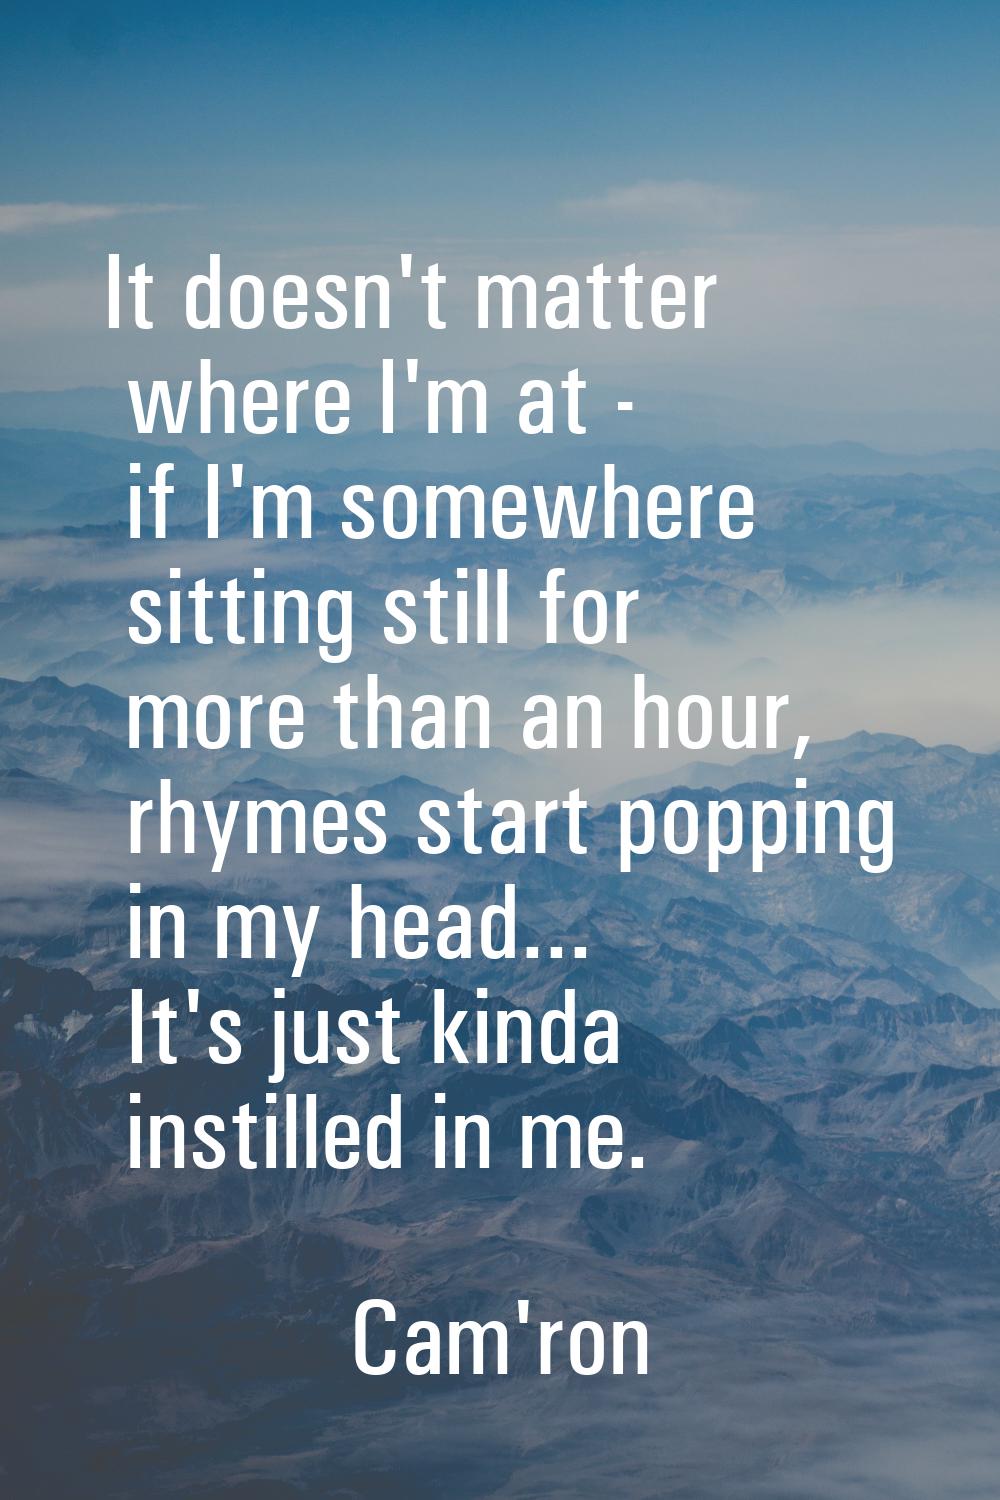 It doesn't matter where I'm at - if I'm somewhere sitting still for more than an hour, rhymes start